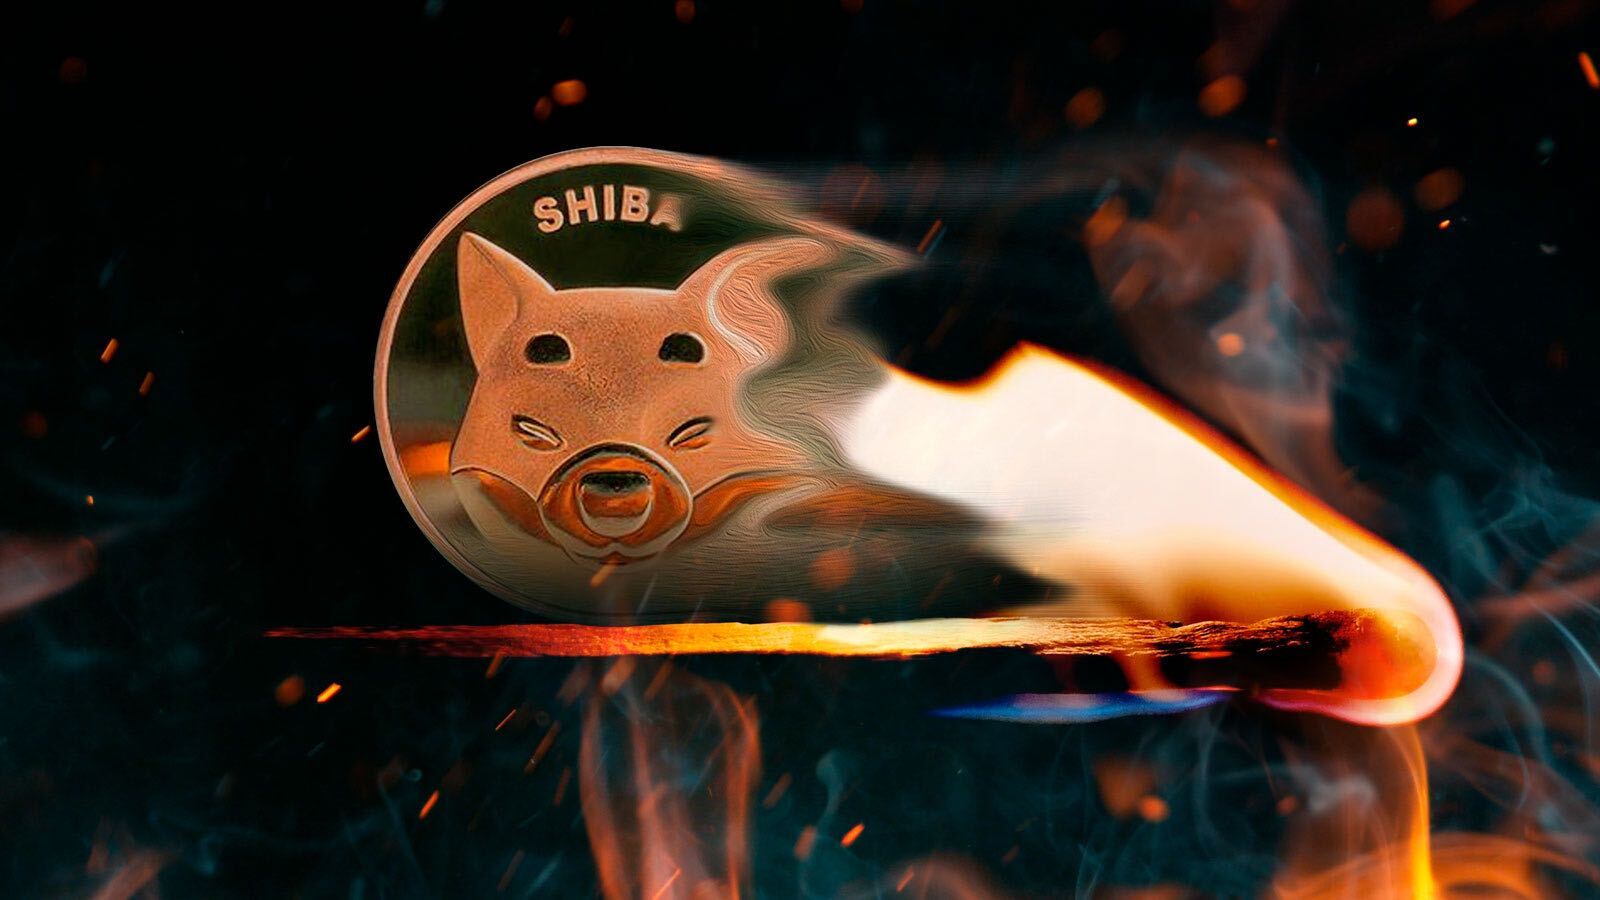 Shiba Inu Burn Rate Raises Concerns, with Only 1,13 Billion SHIB Burned In the Last 7 Days